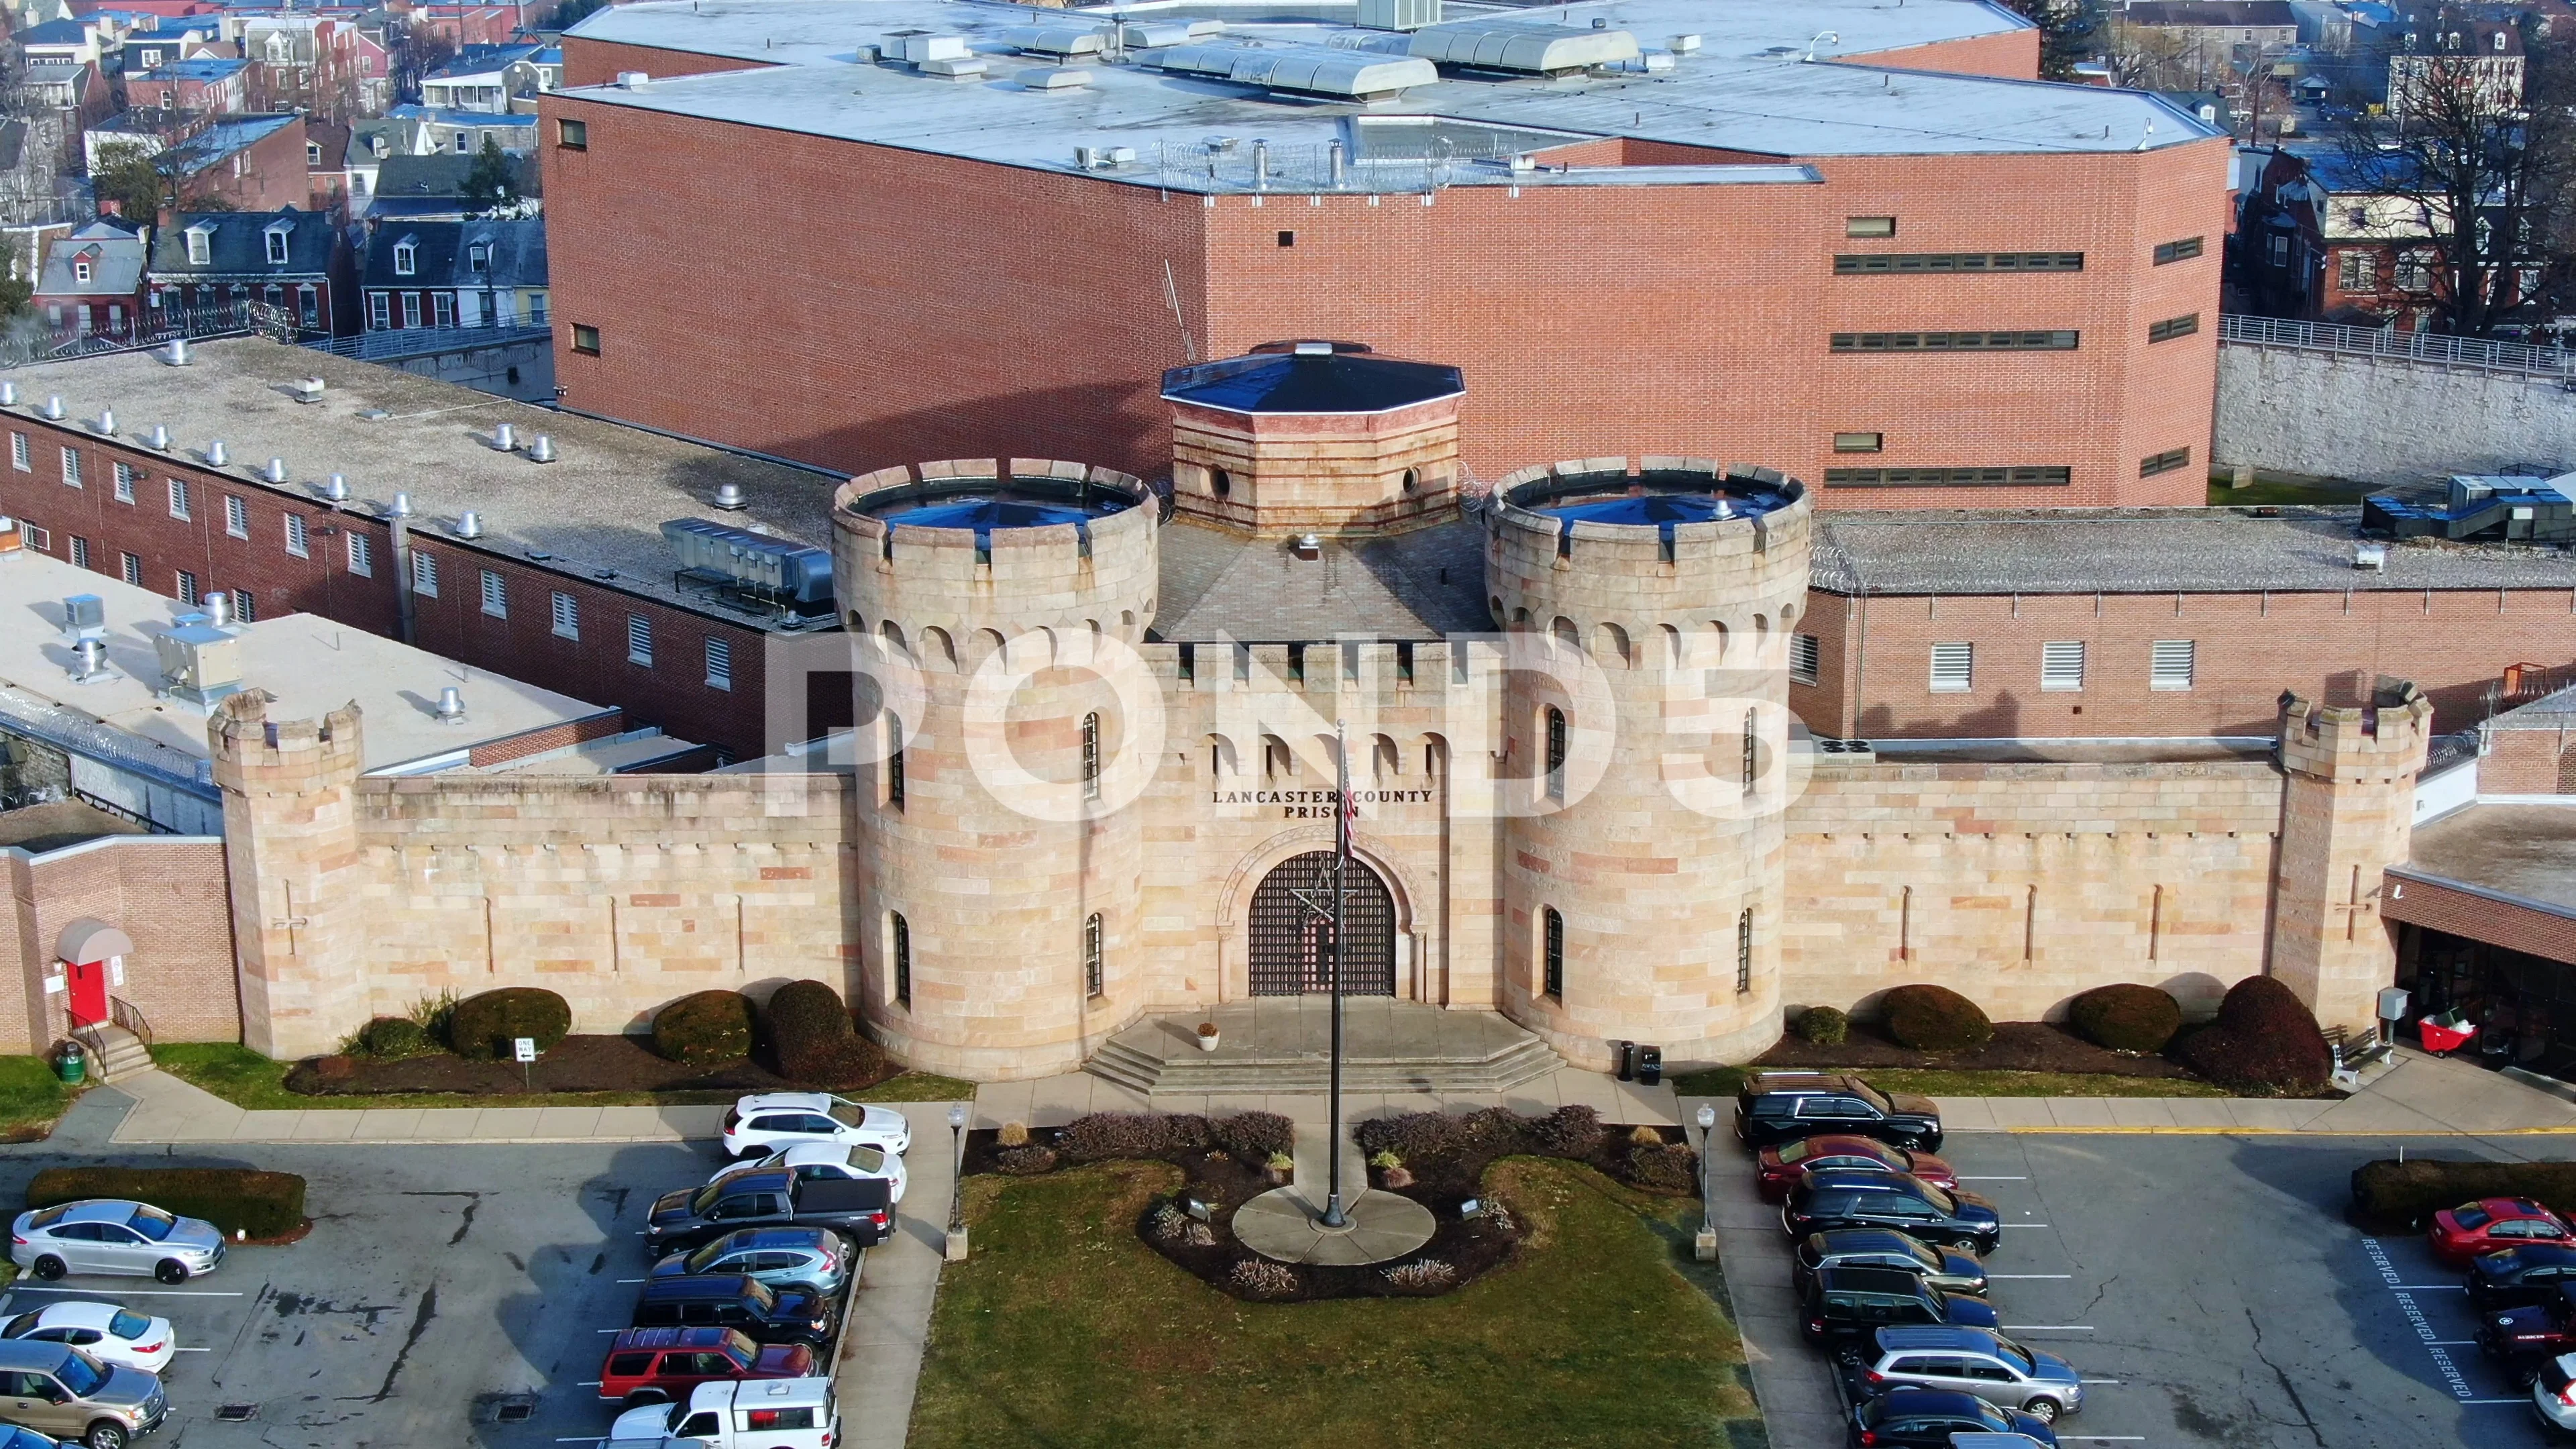 Lancaster County Prison with historic towers above main entrance, aerial